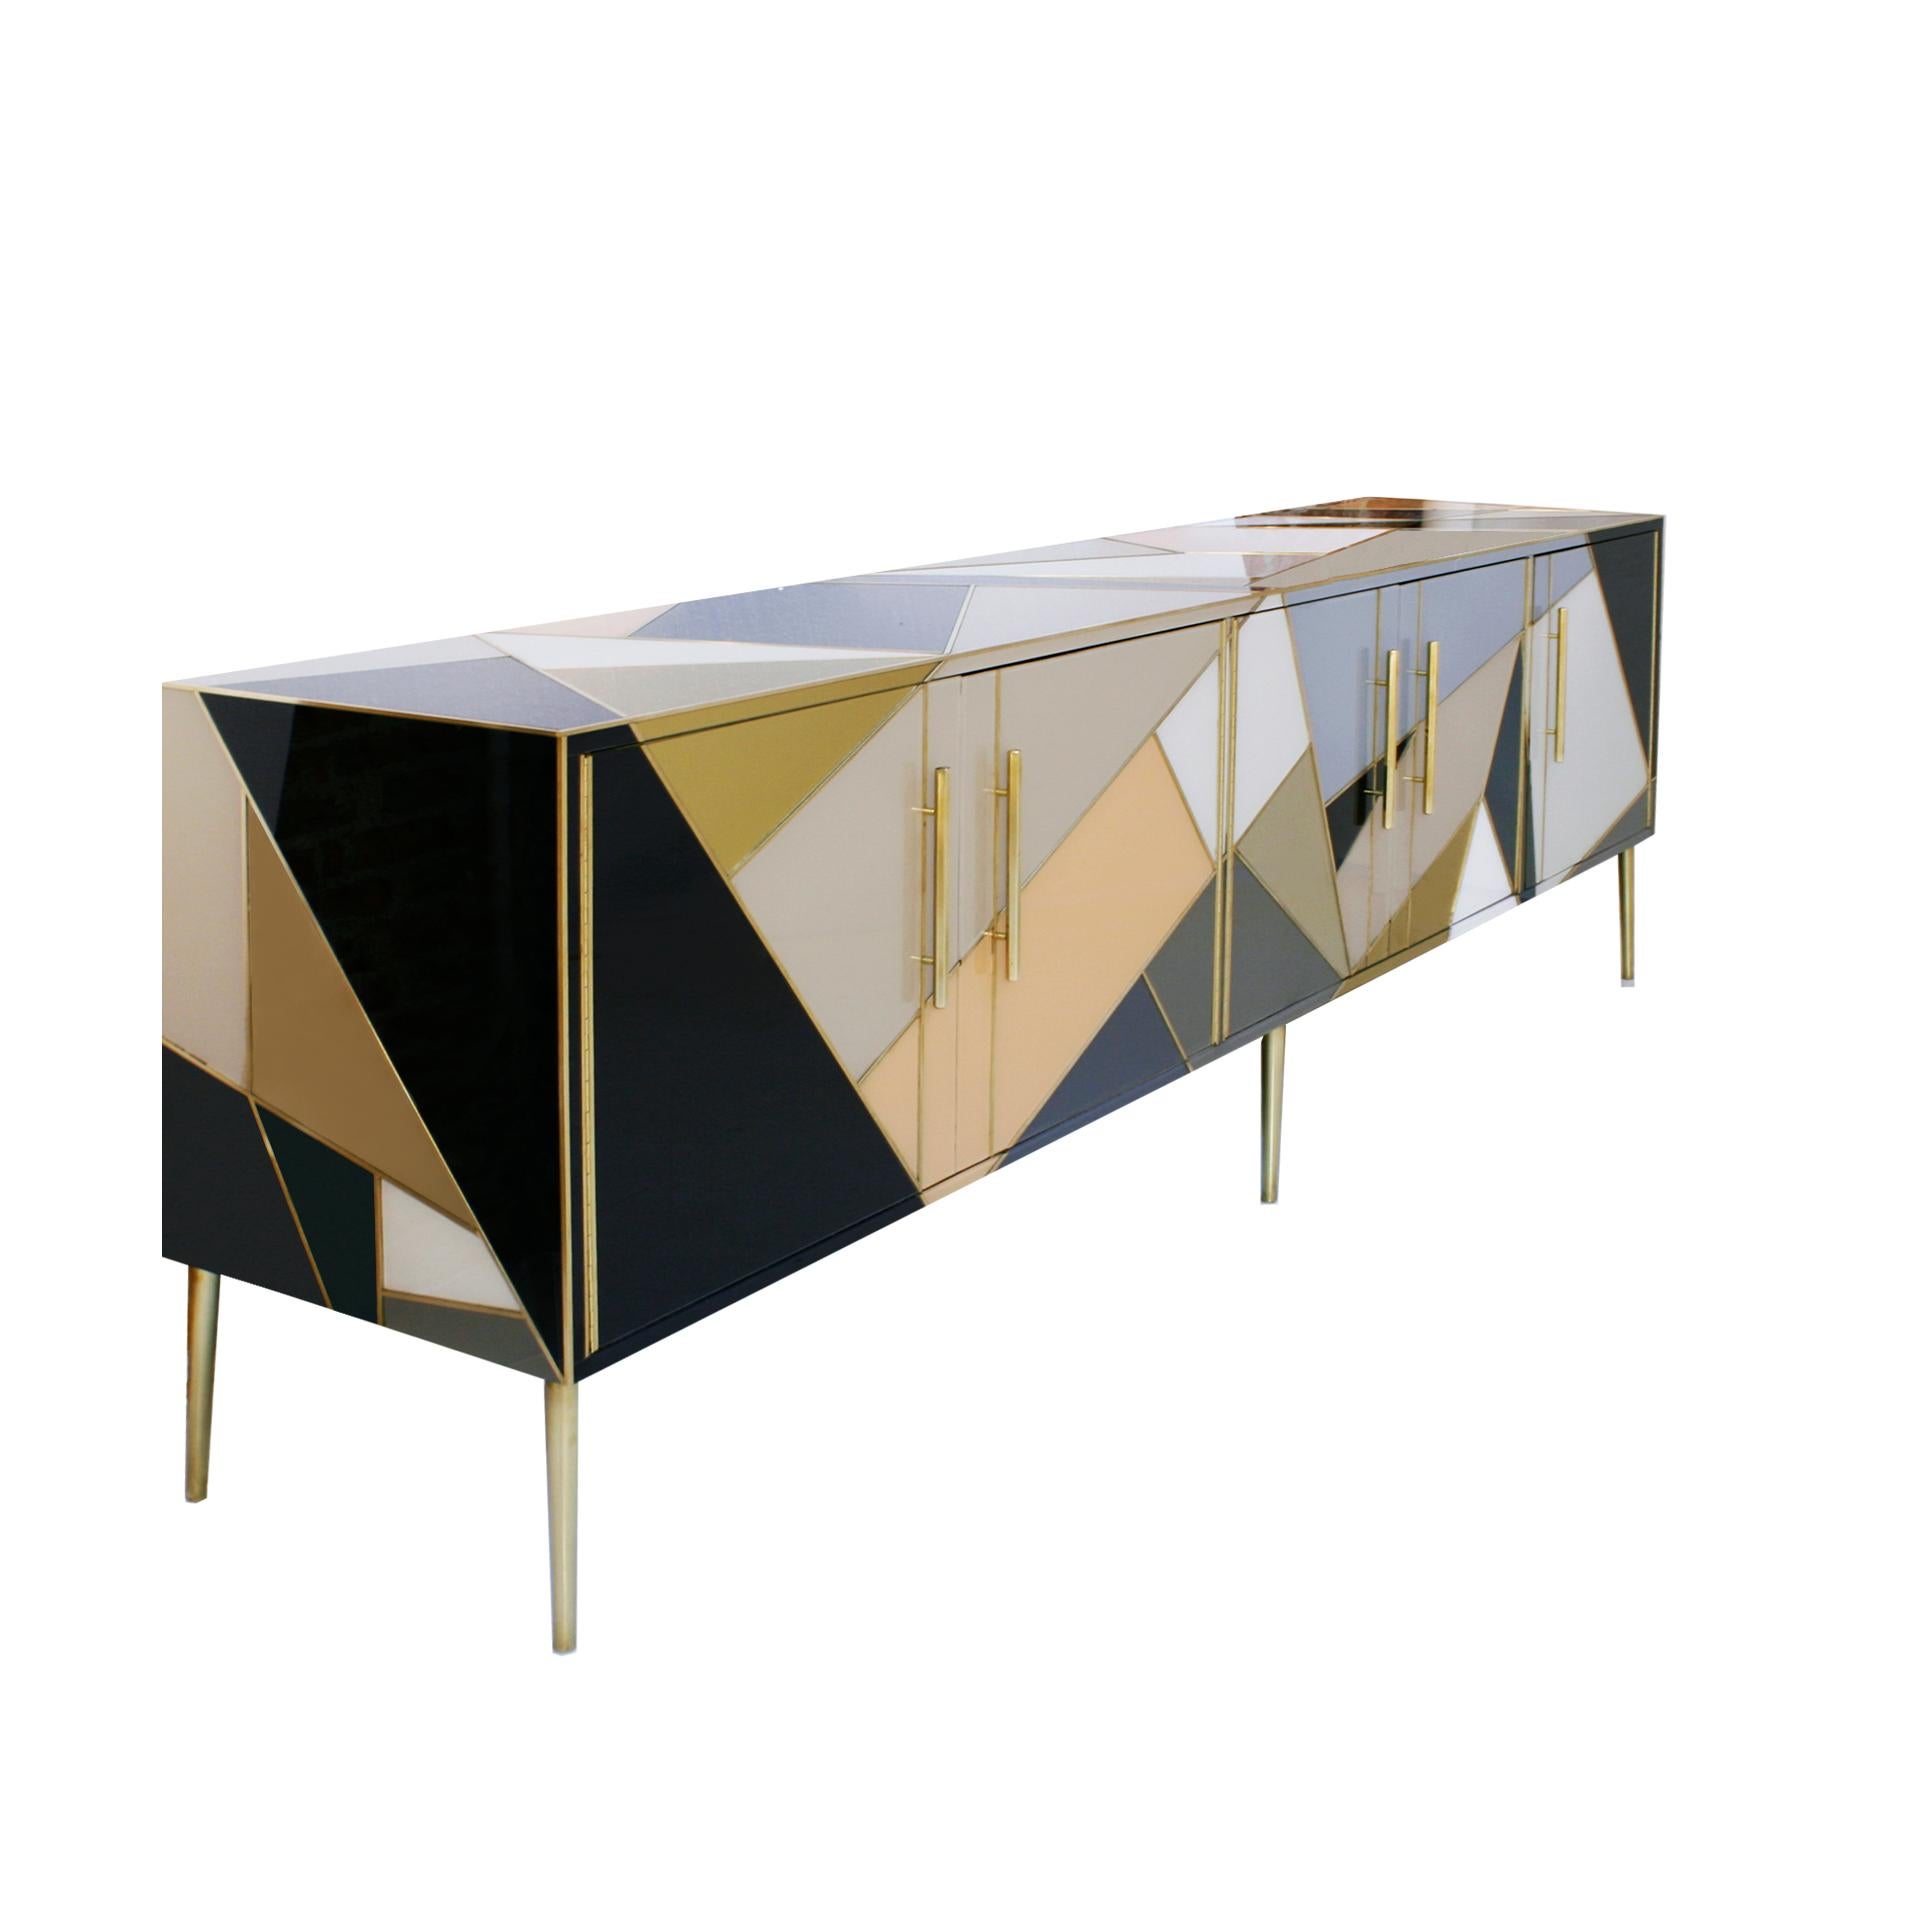 Italian sideboard made of solid wood structure from the 1950s covered in Murano colored glass. Composed of five drawers with brass handles and legs.